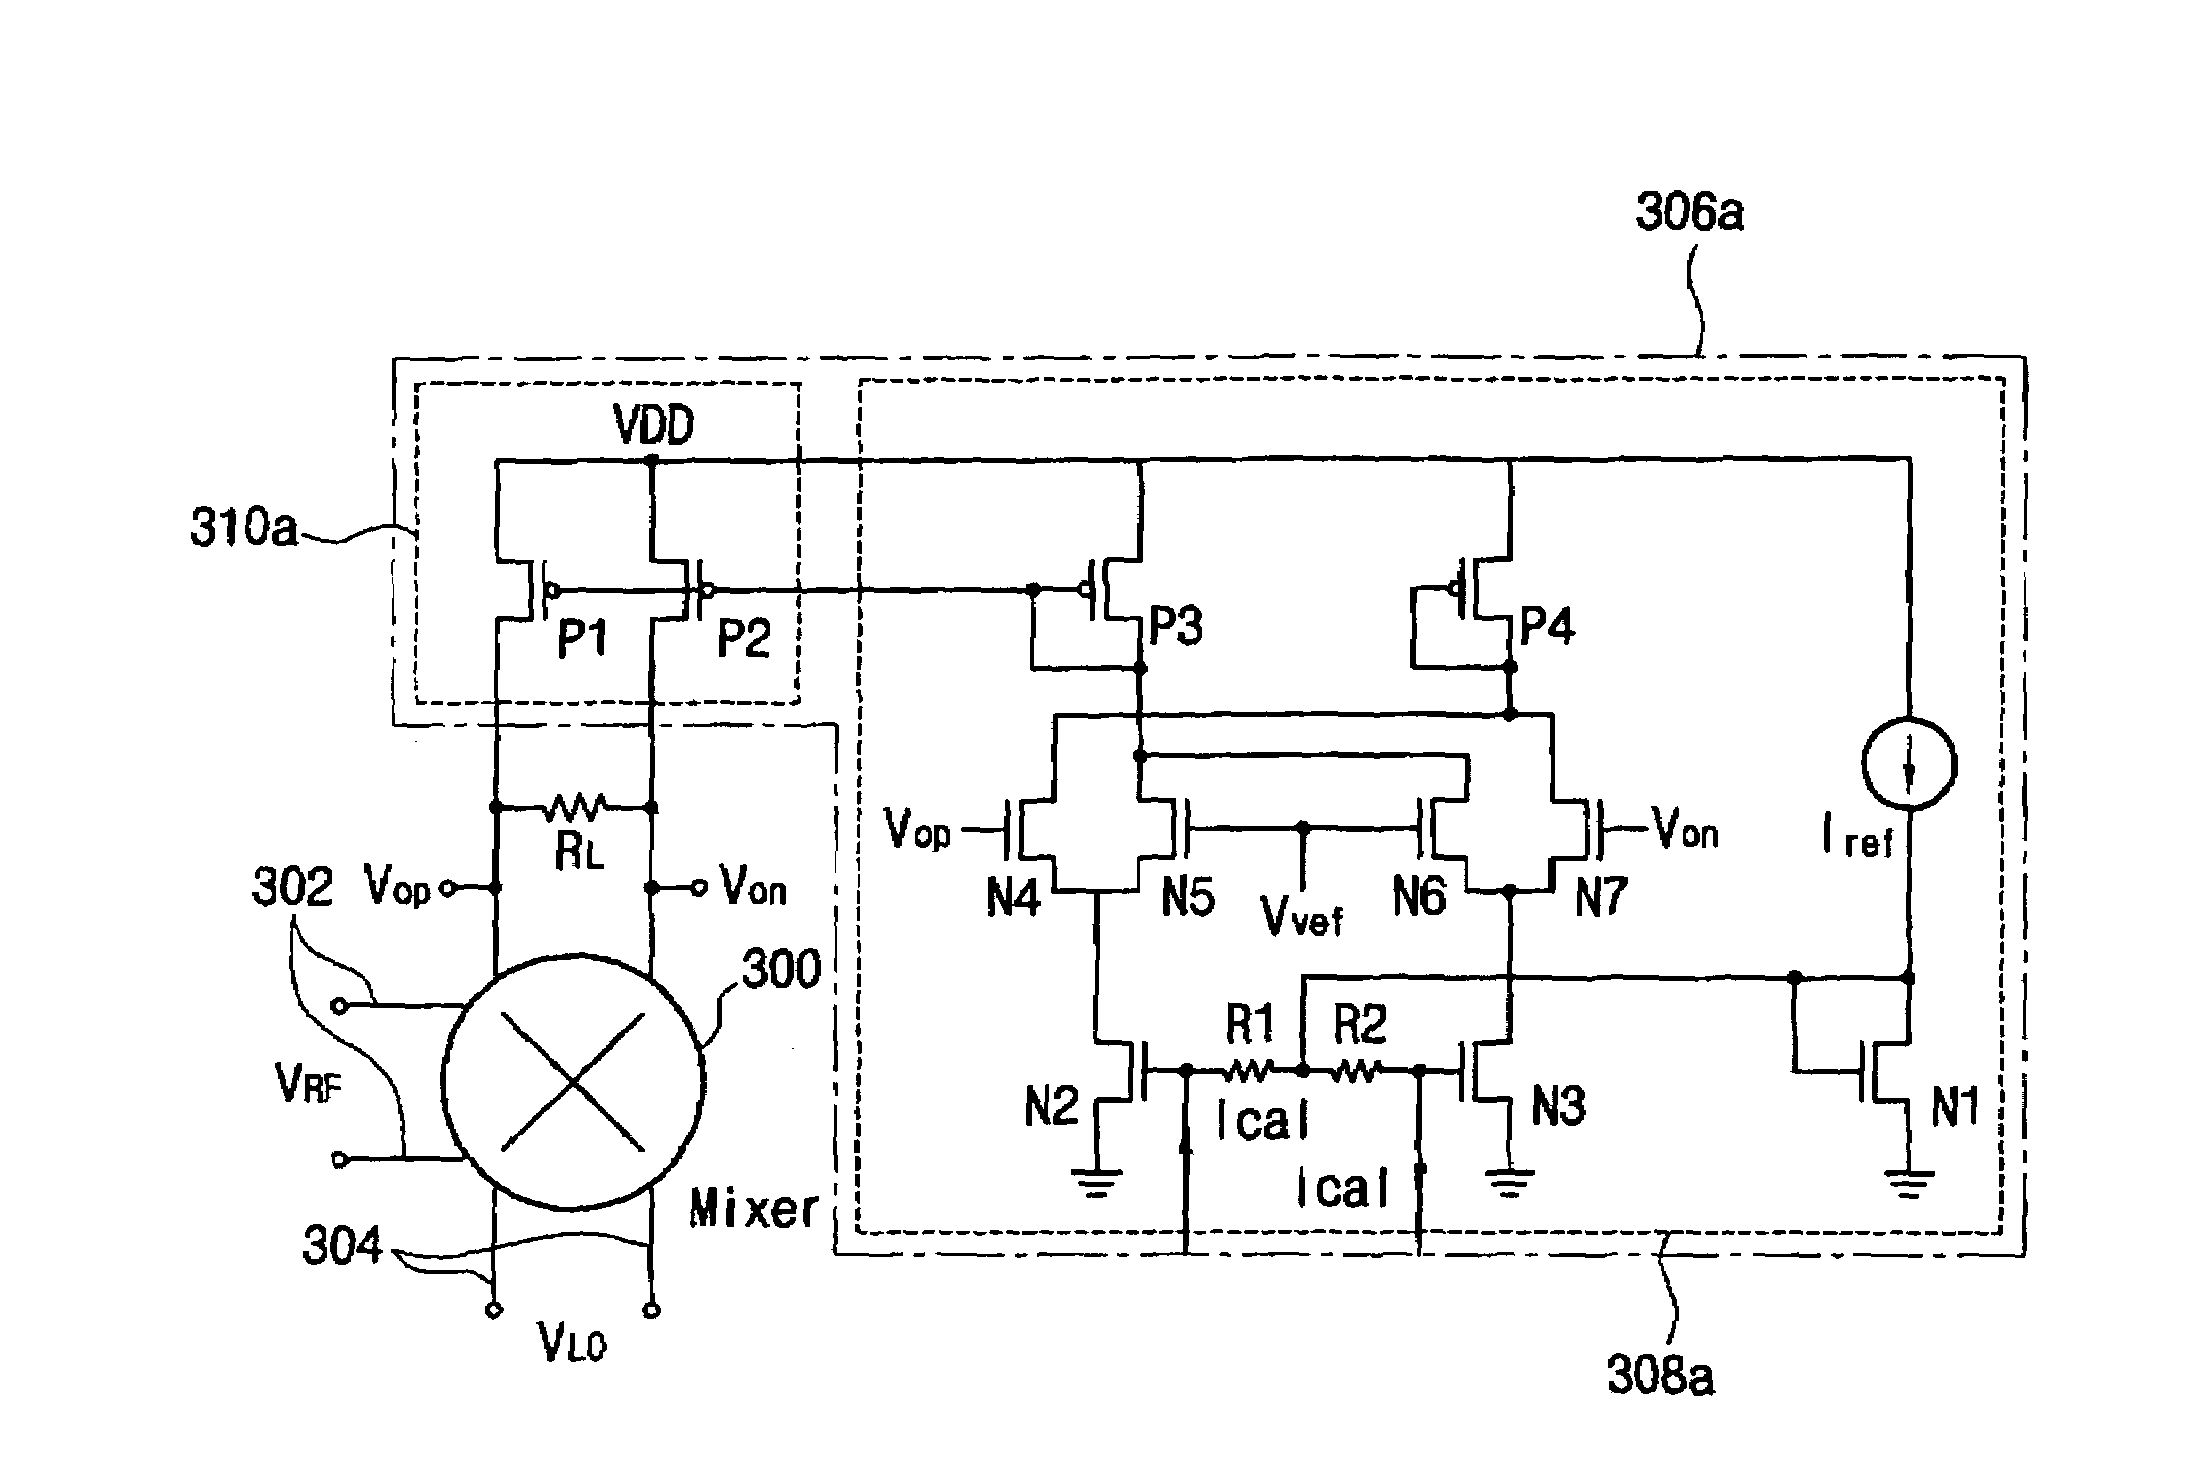 Circuit for reducing second order intermodulation